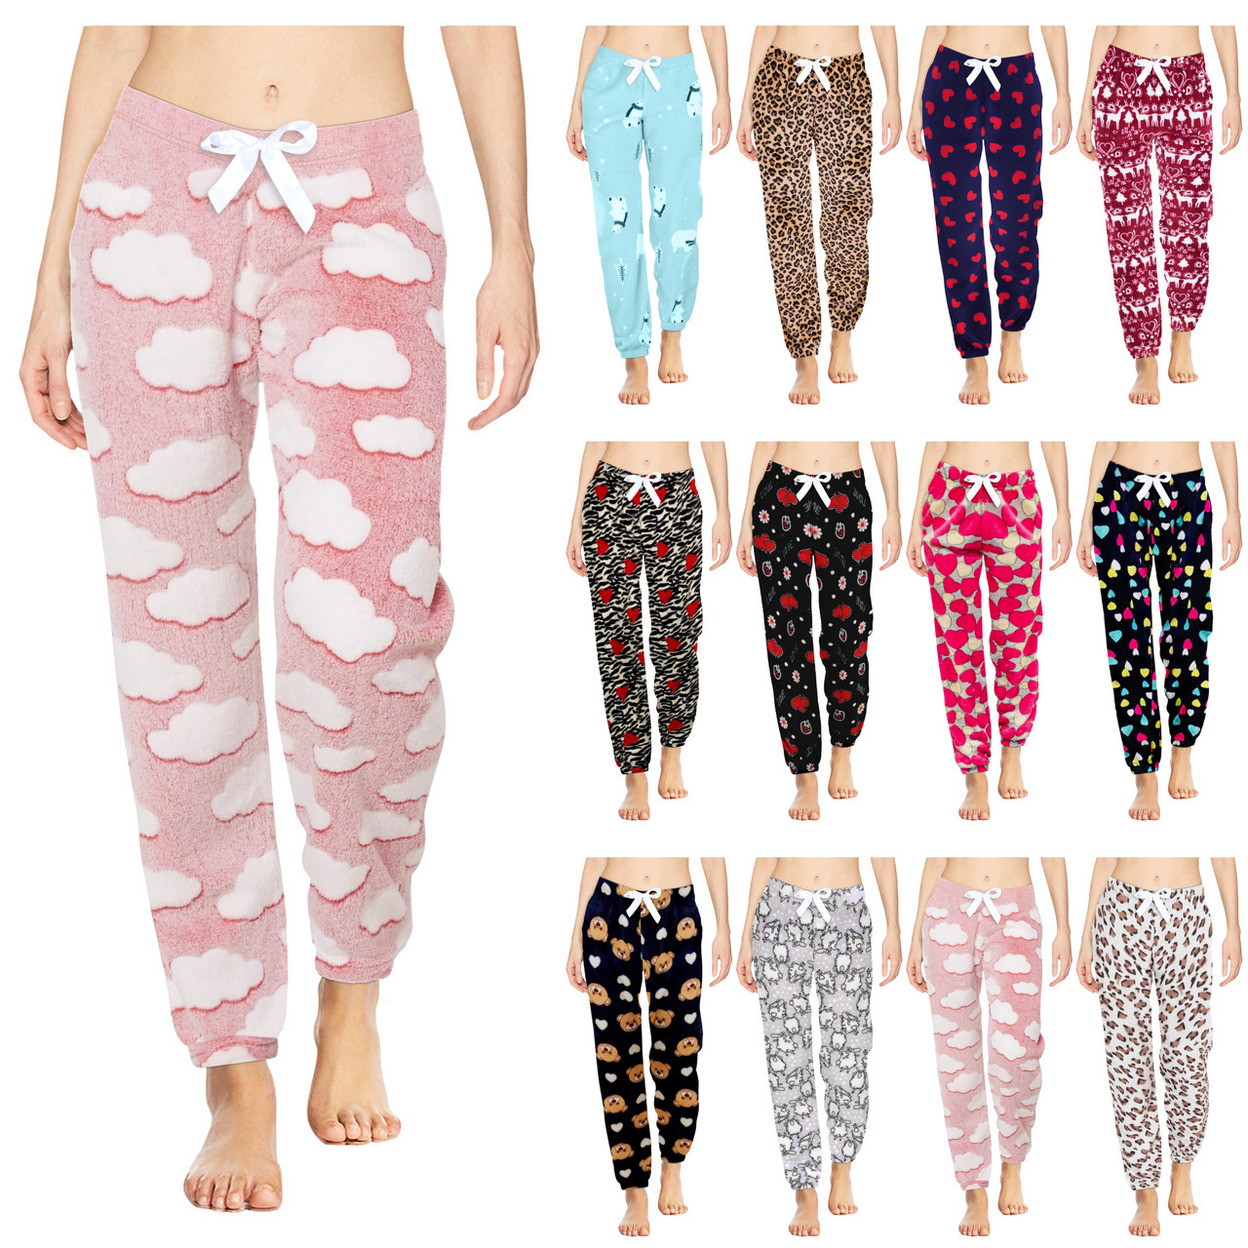 Multi-Pack: Women's Printed Ultra-Soft Comfy Stretch Micro-Fleece Pajama Lounge Pants - 1-pack, Shapes, Xx-large